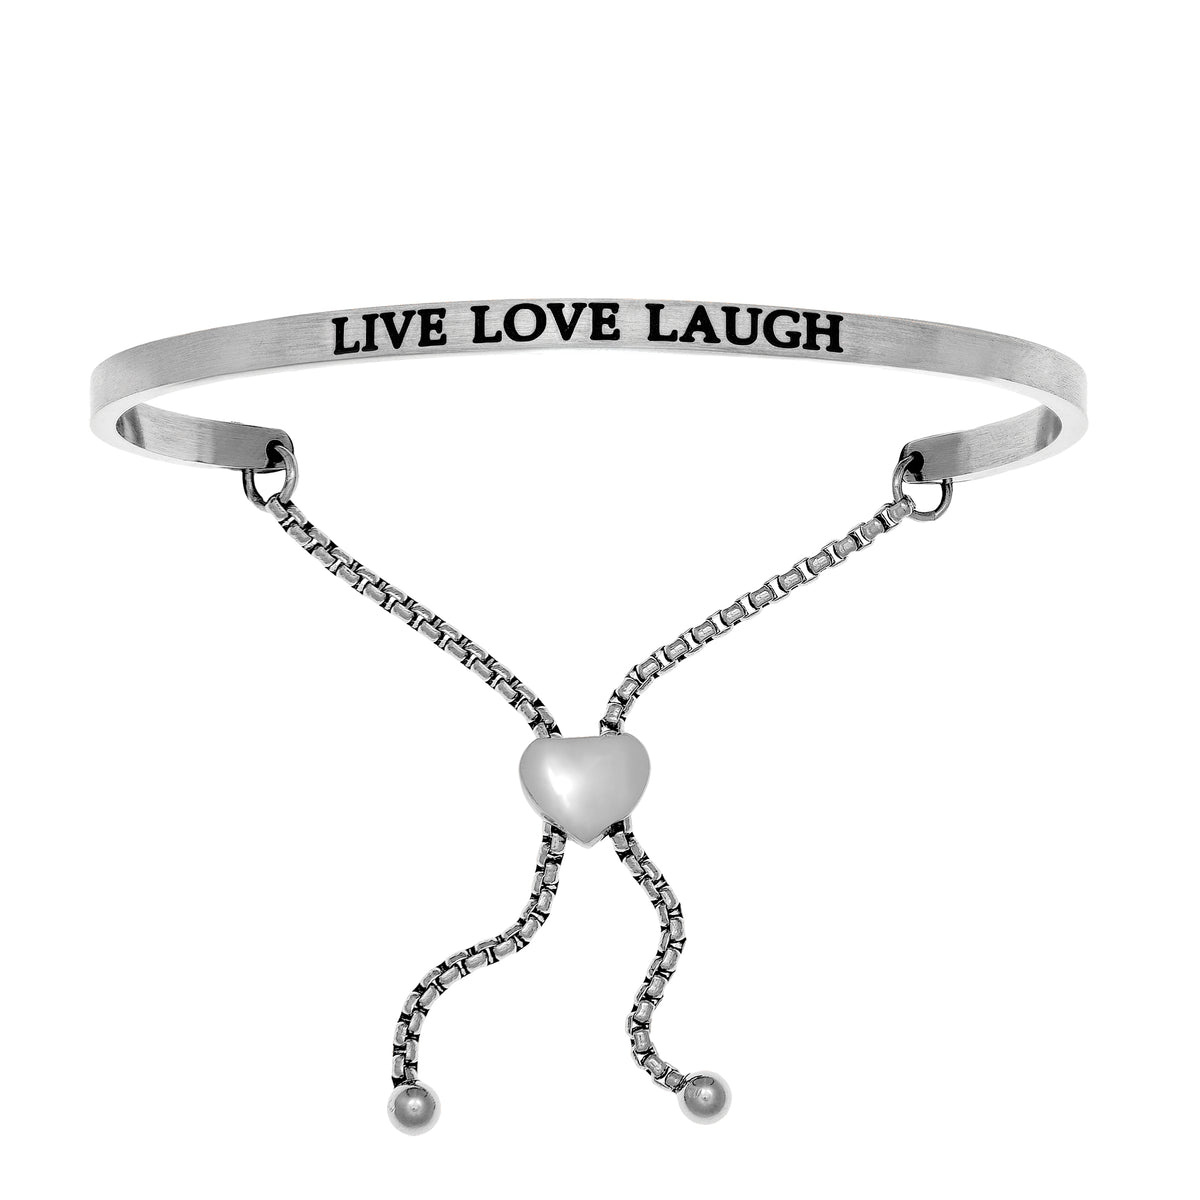 Intuitions Stainless Steel LIVE LOVE LAUGH Diamond Accent Adjustable Bracelet fine designer jewelry for men and women